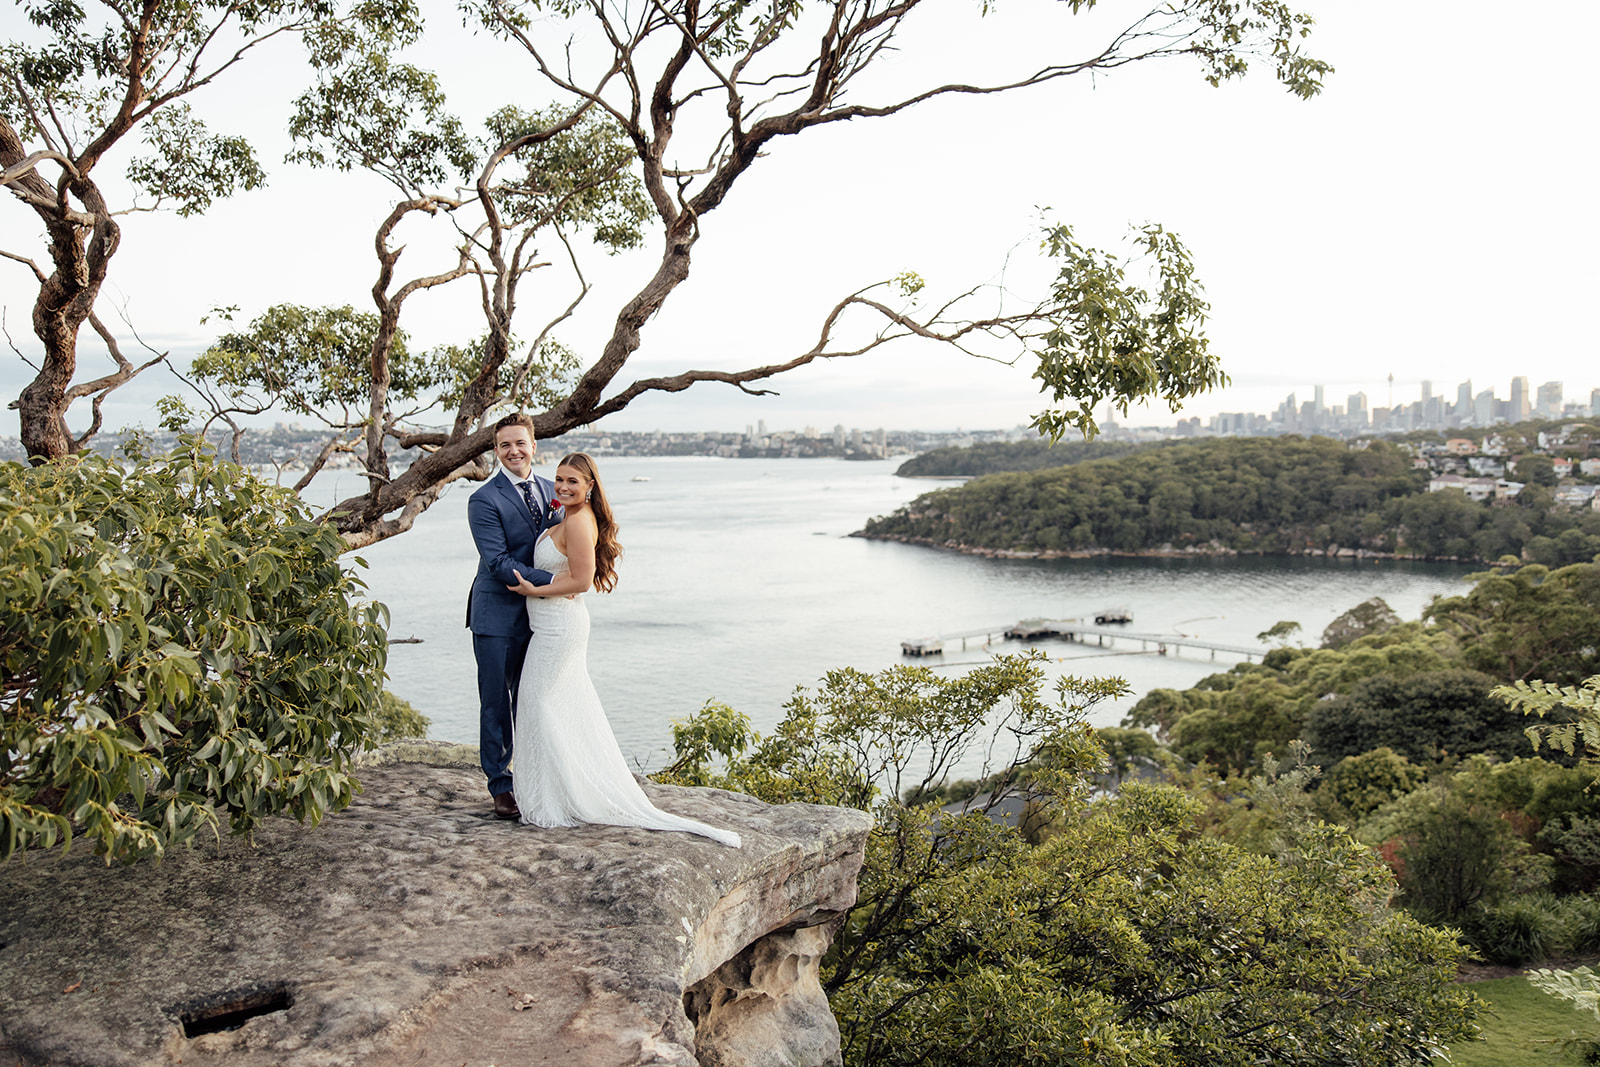 A bride and groom with ocean views